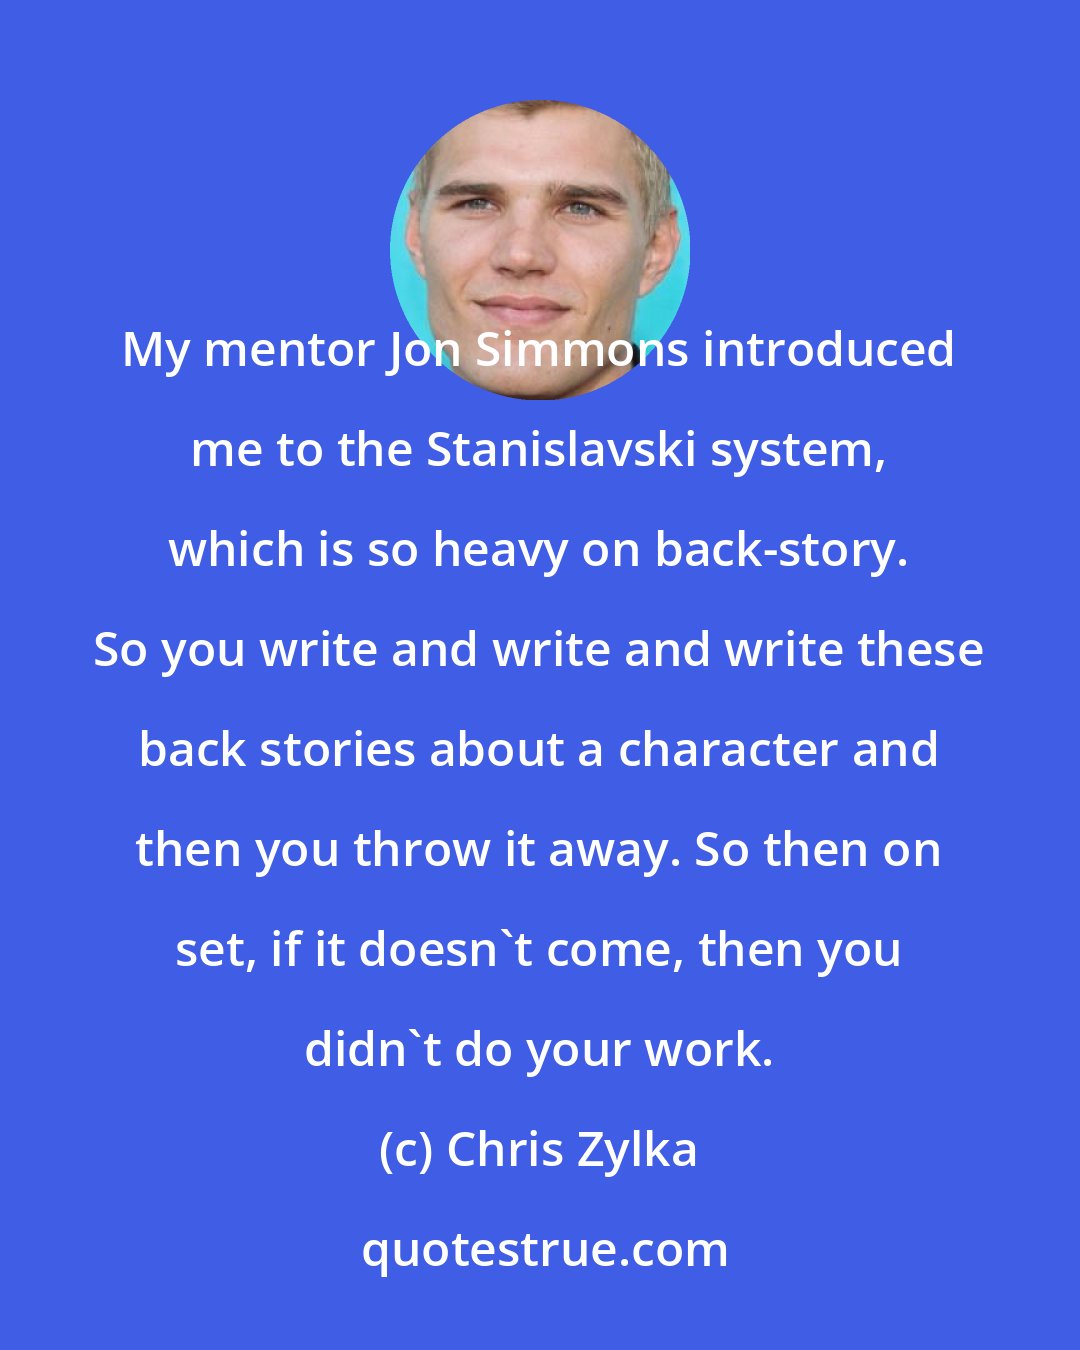 Chris Zylka: My mentor Jon Simmons introduced me to the Stanislavski system, which is so heavy on back-story. So you write and write and write these back stories about a character and then you throw it away. So then on set, if it doesn't come, then you didn't do your work.